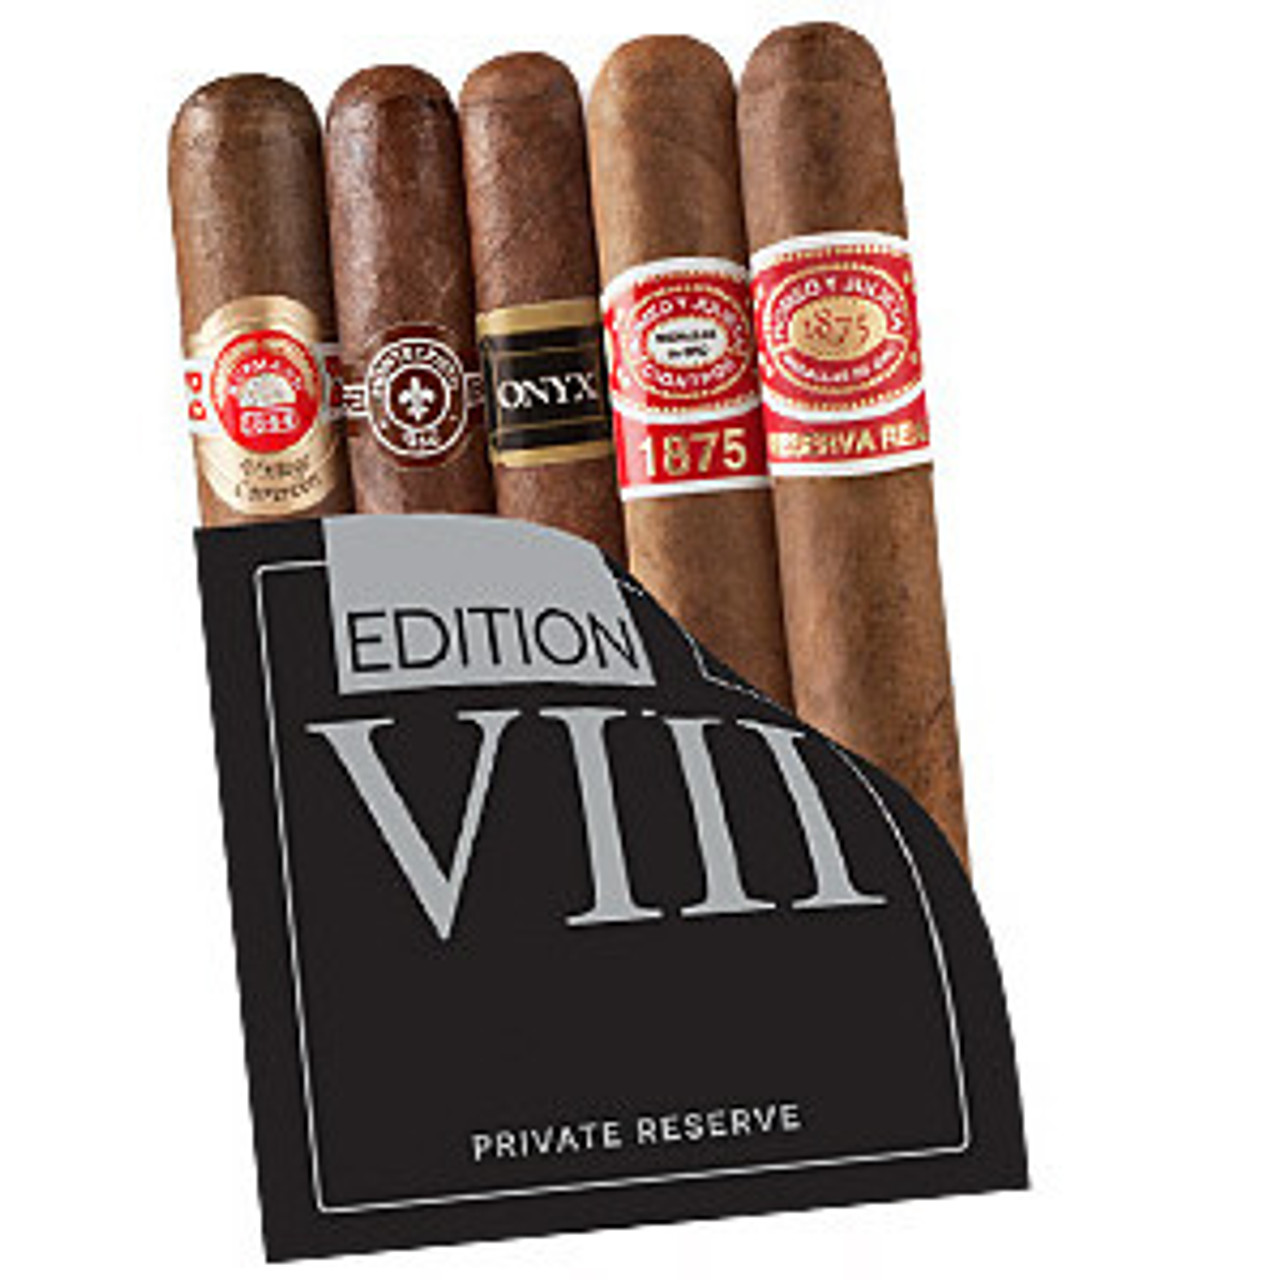 Cigar Samplers Private Reserve Edition VIII (Pack of 5) *Box